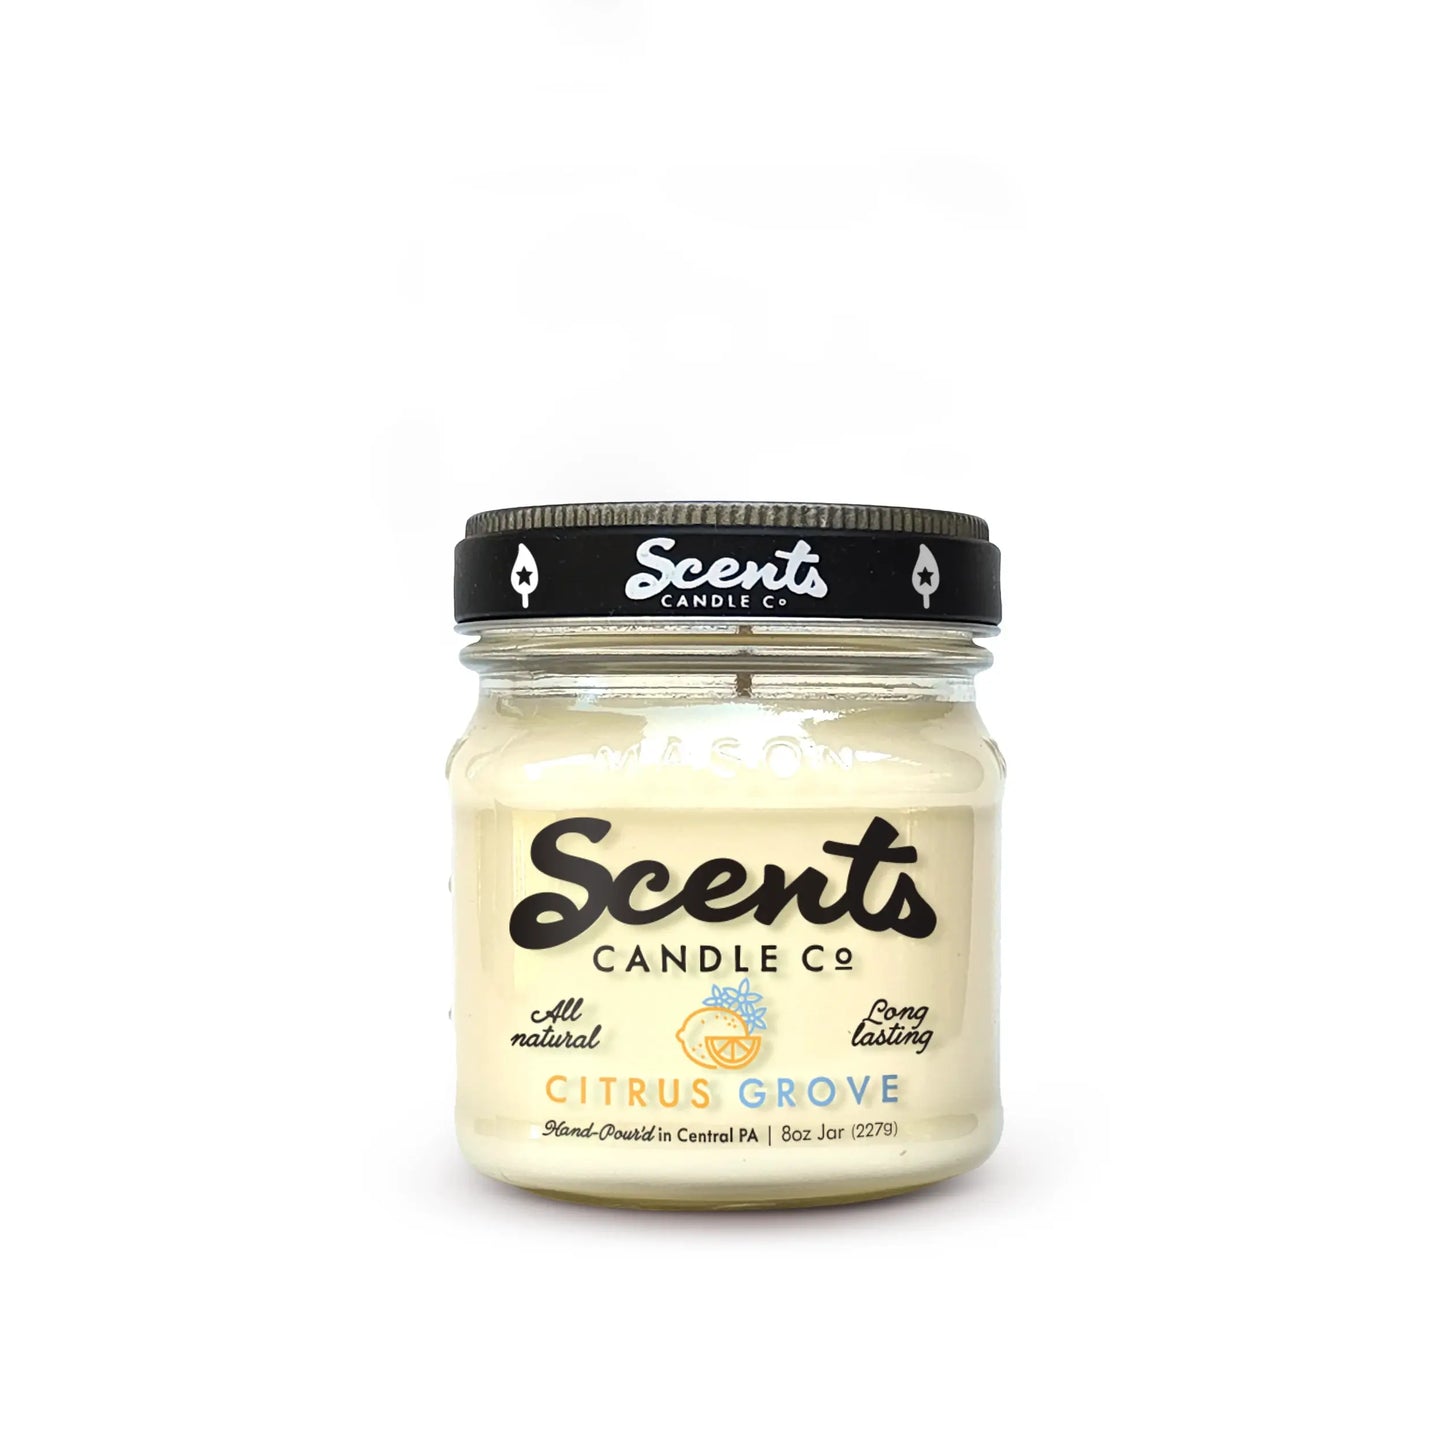 Scents Candle Co. Citrus Grove Soy Wax Candles